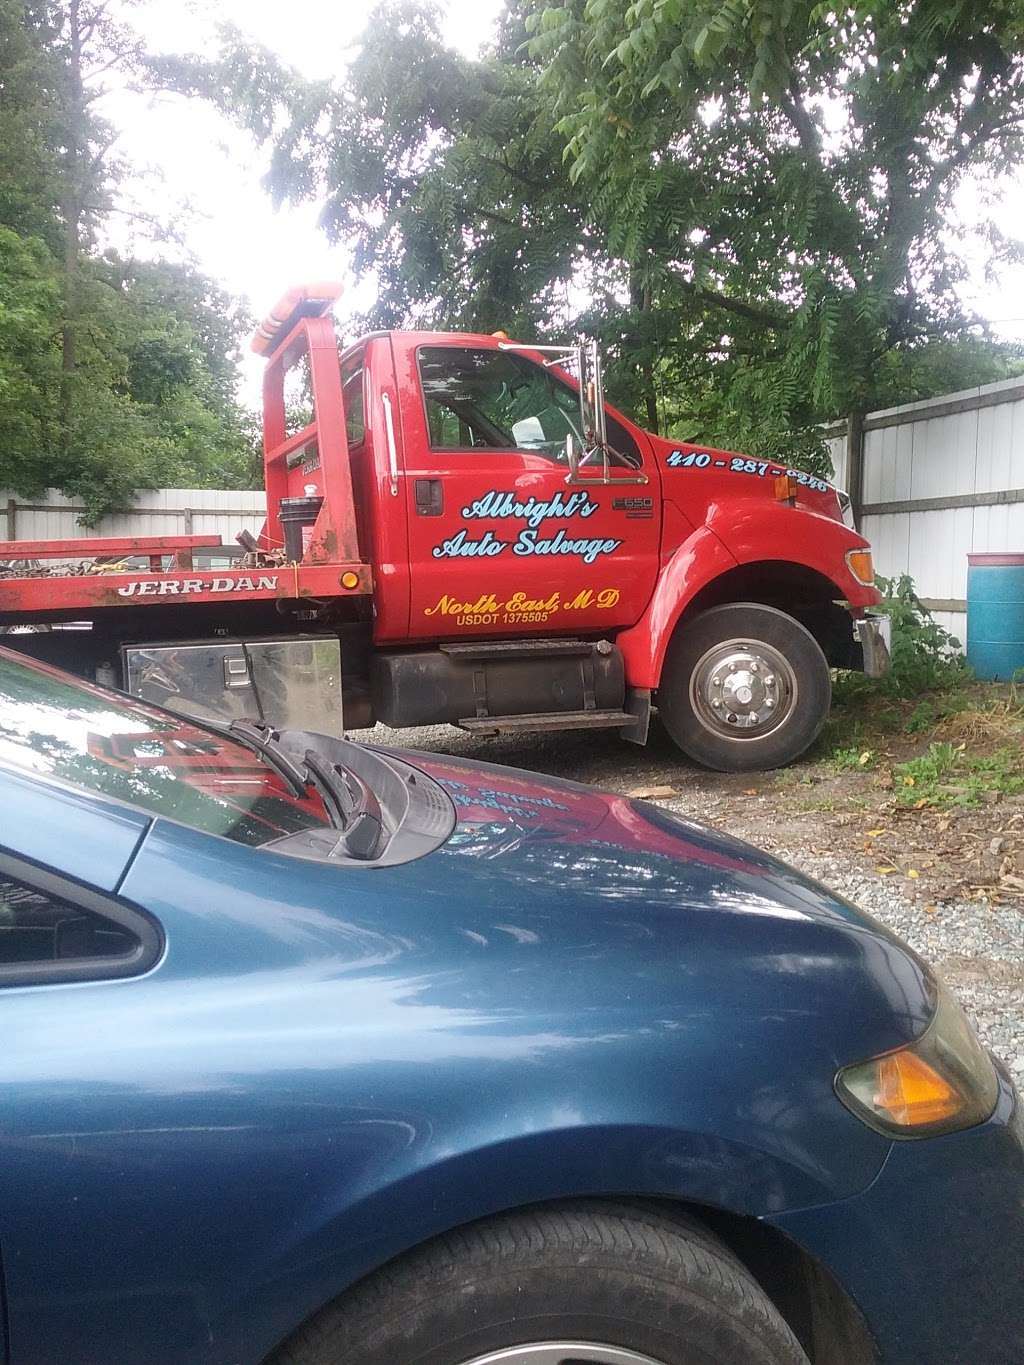 Albrights Auto Salvage | 40 Creedmore Ln, North East, MD 21901 | Phone: (410) 287-9246